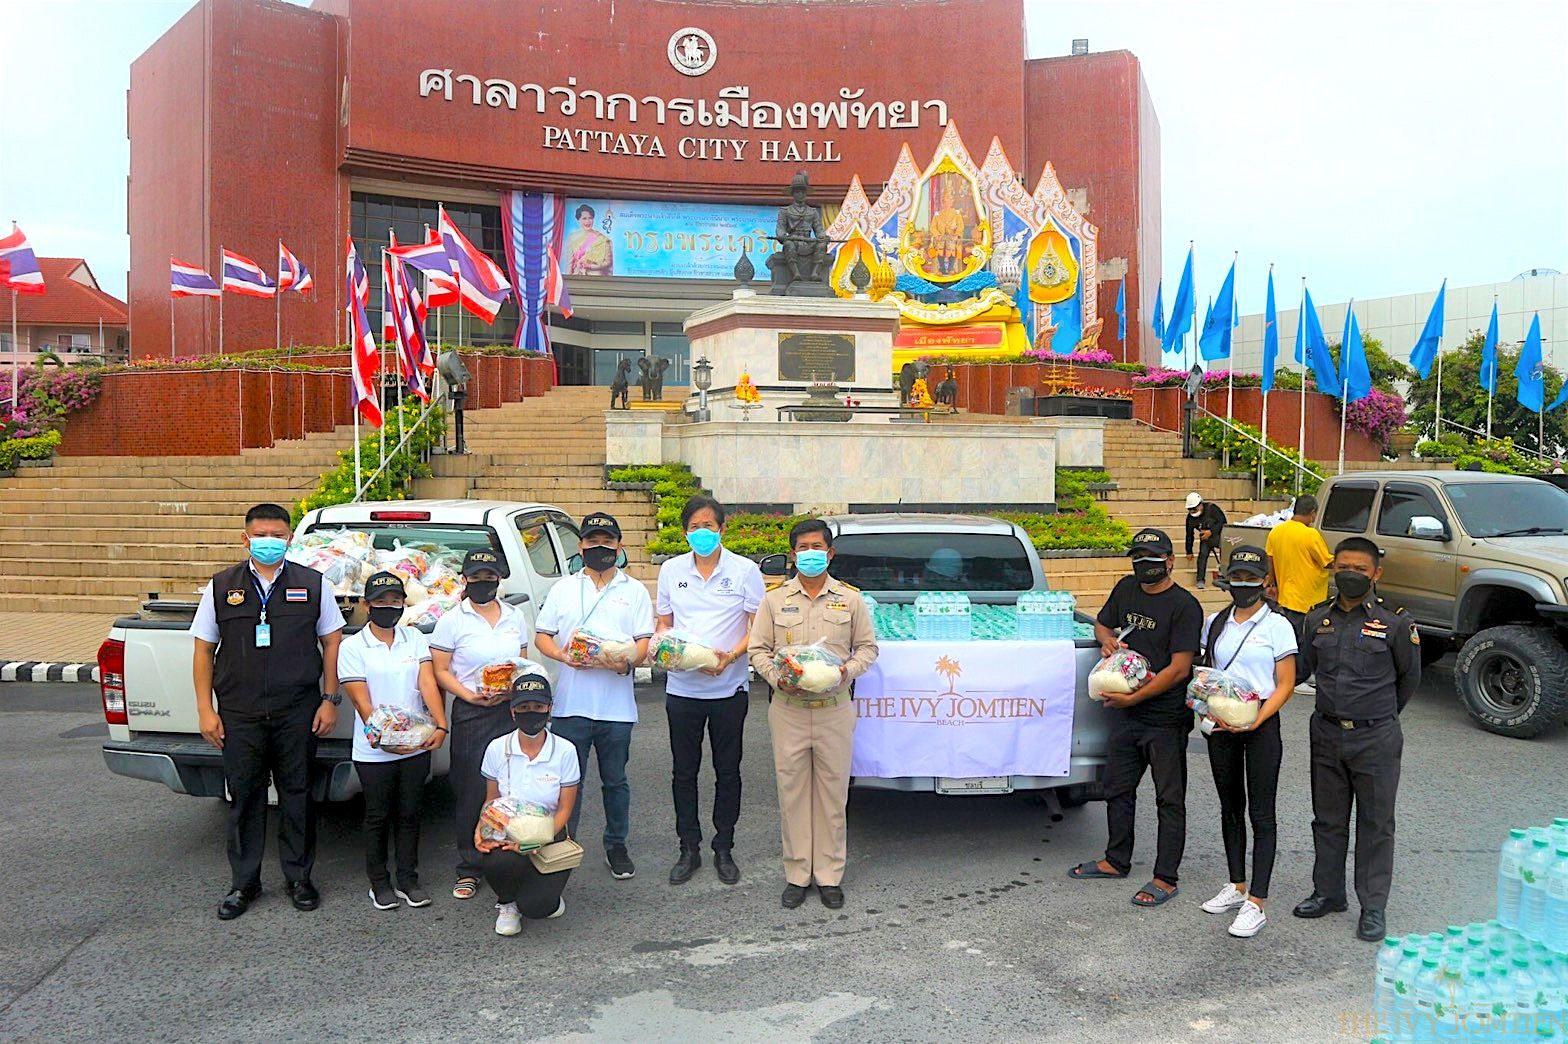 The Ivy Jomtien Beach donating survival bags to the communities Soi Khao Noi affected by COVID-19.